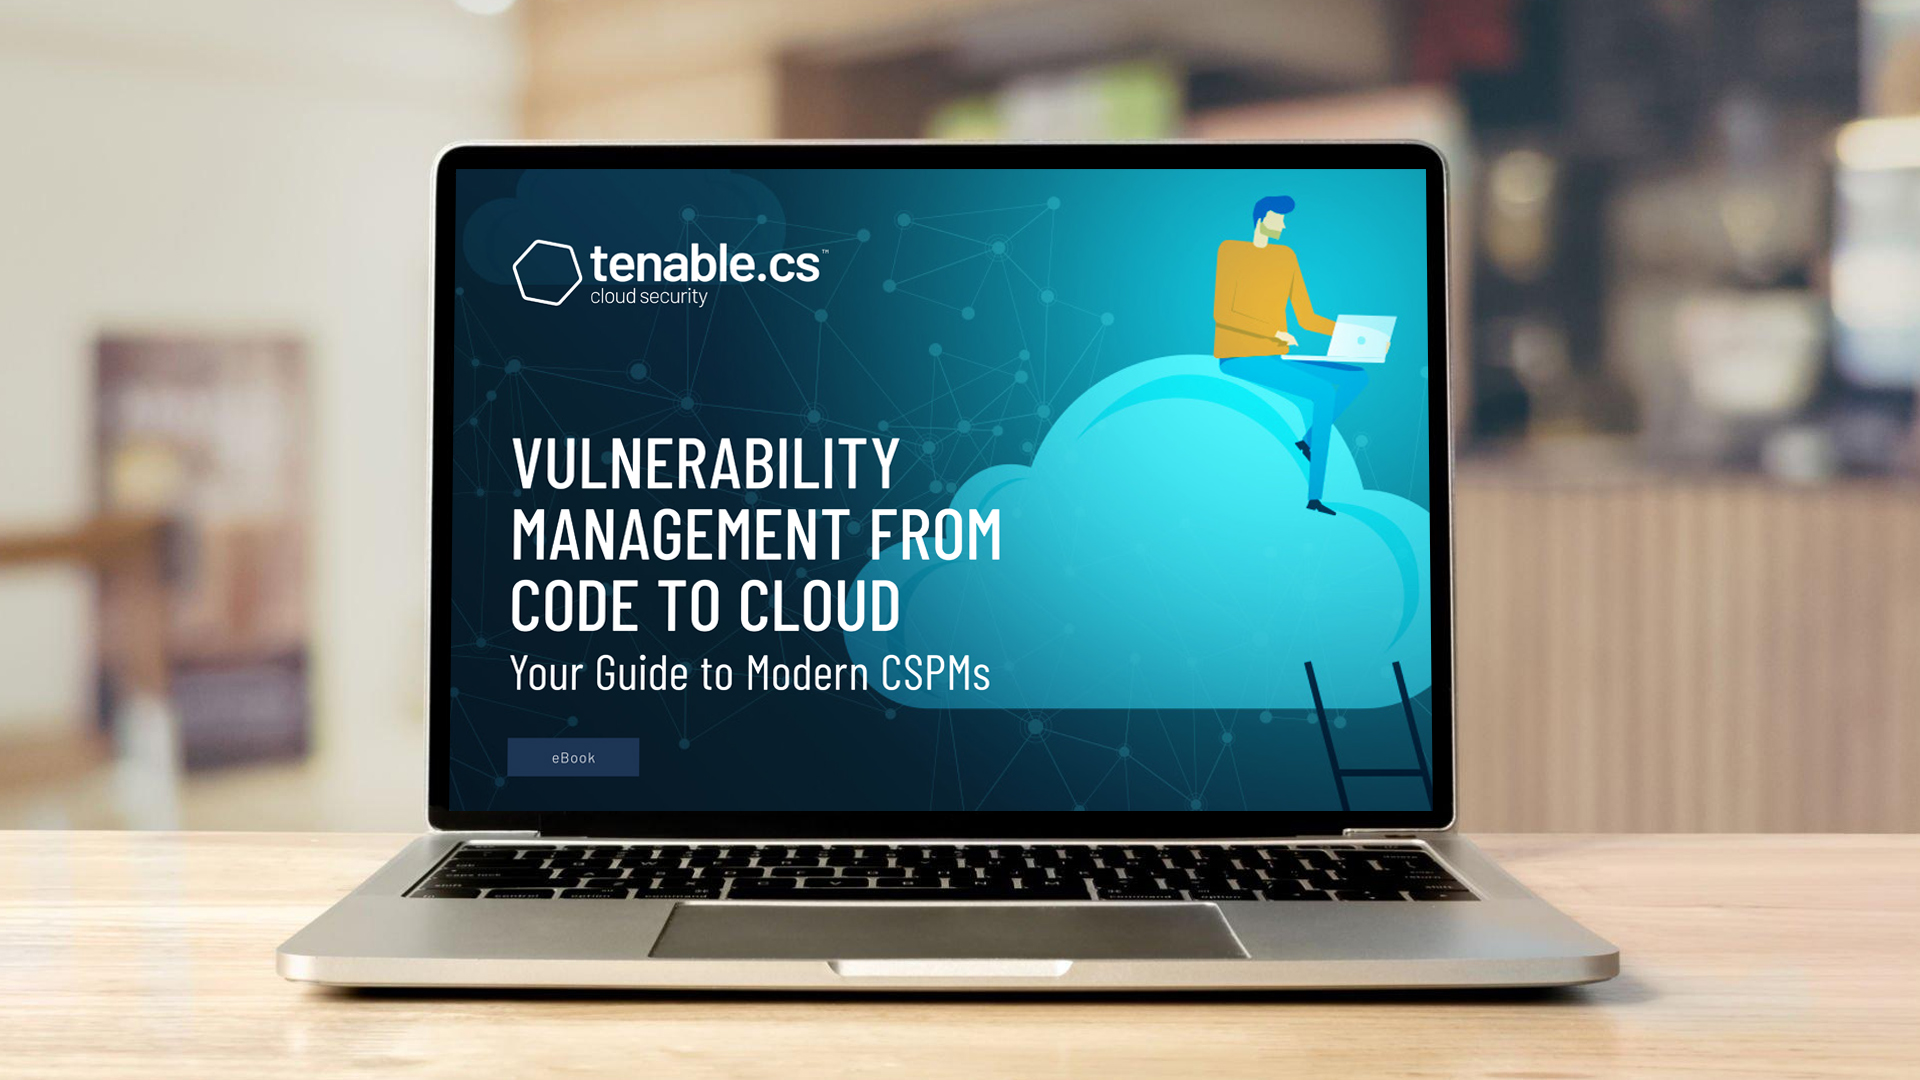 How to Extend Vulnerability Management from Code to Cloud